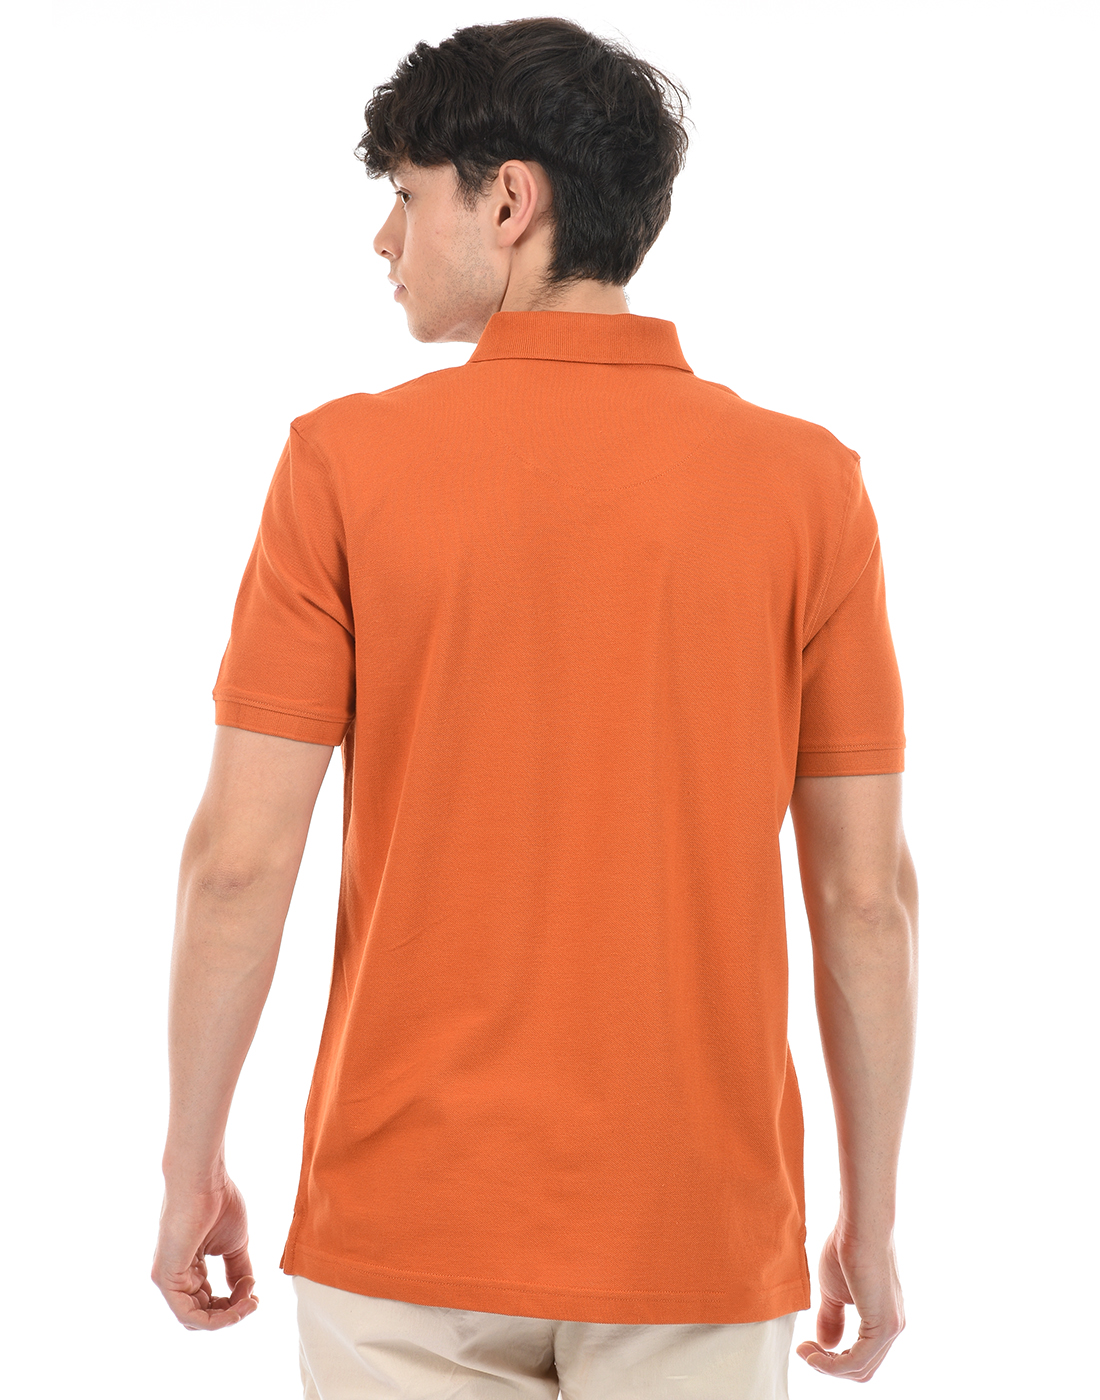 ONEWAY Half Sleeve Solid Polo Neck T-Shirt for Men|100% Cotton|Regular Fit|Casual Wear|Collared Men's T-Shirt